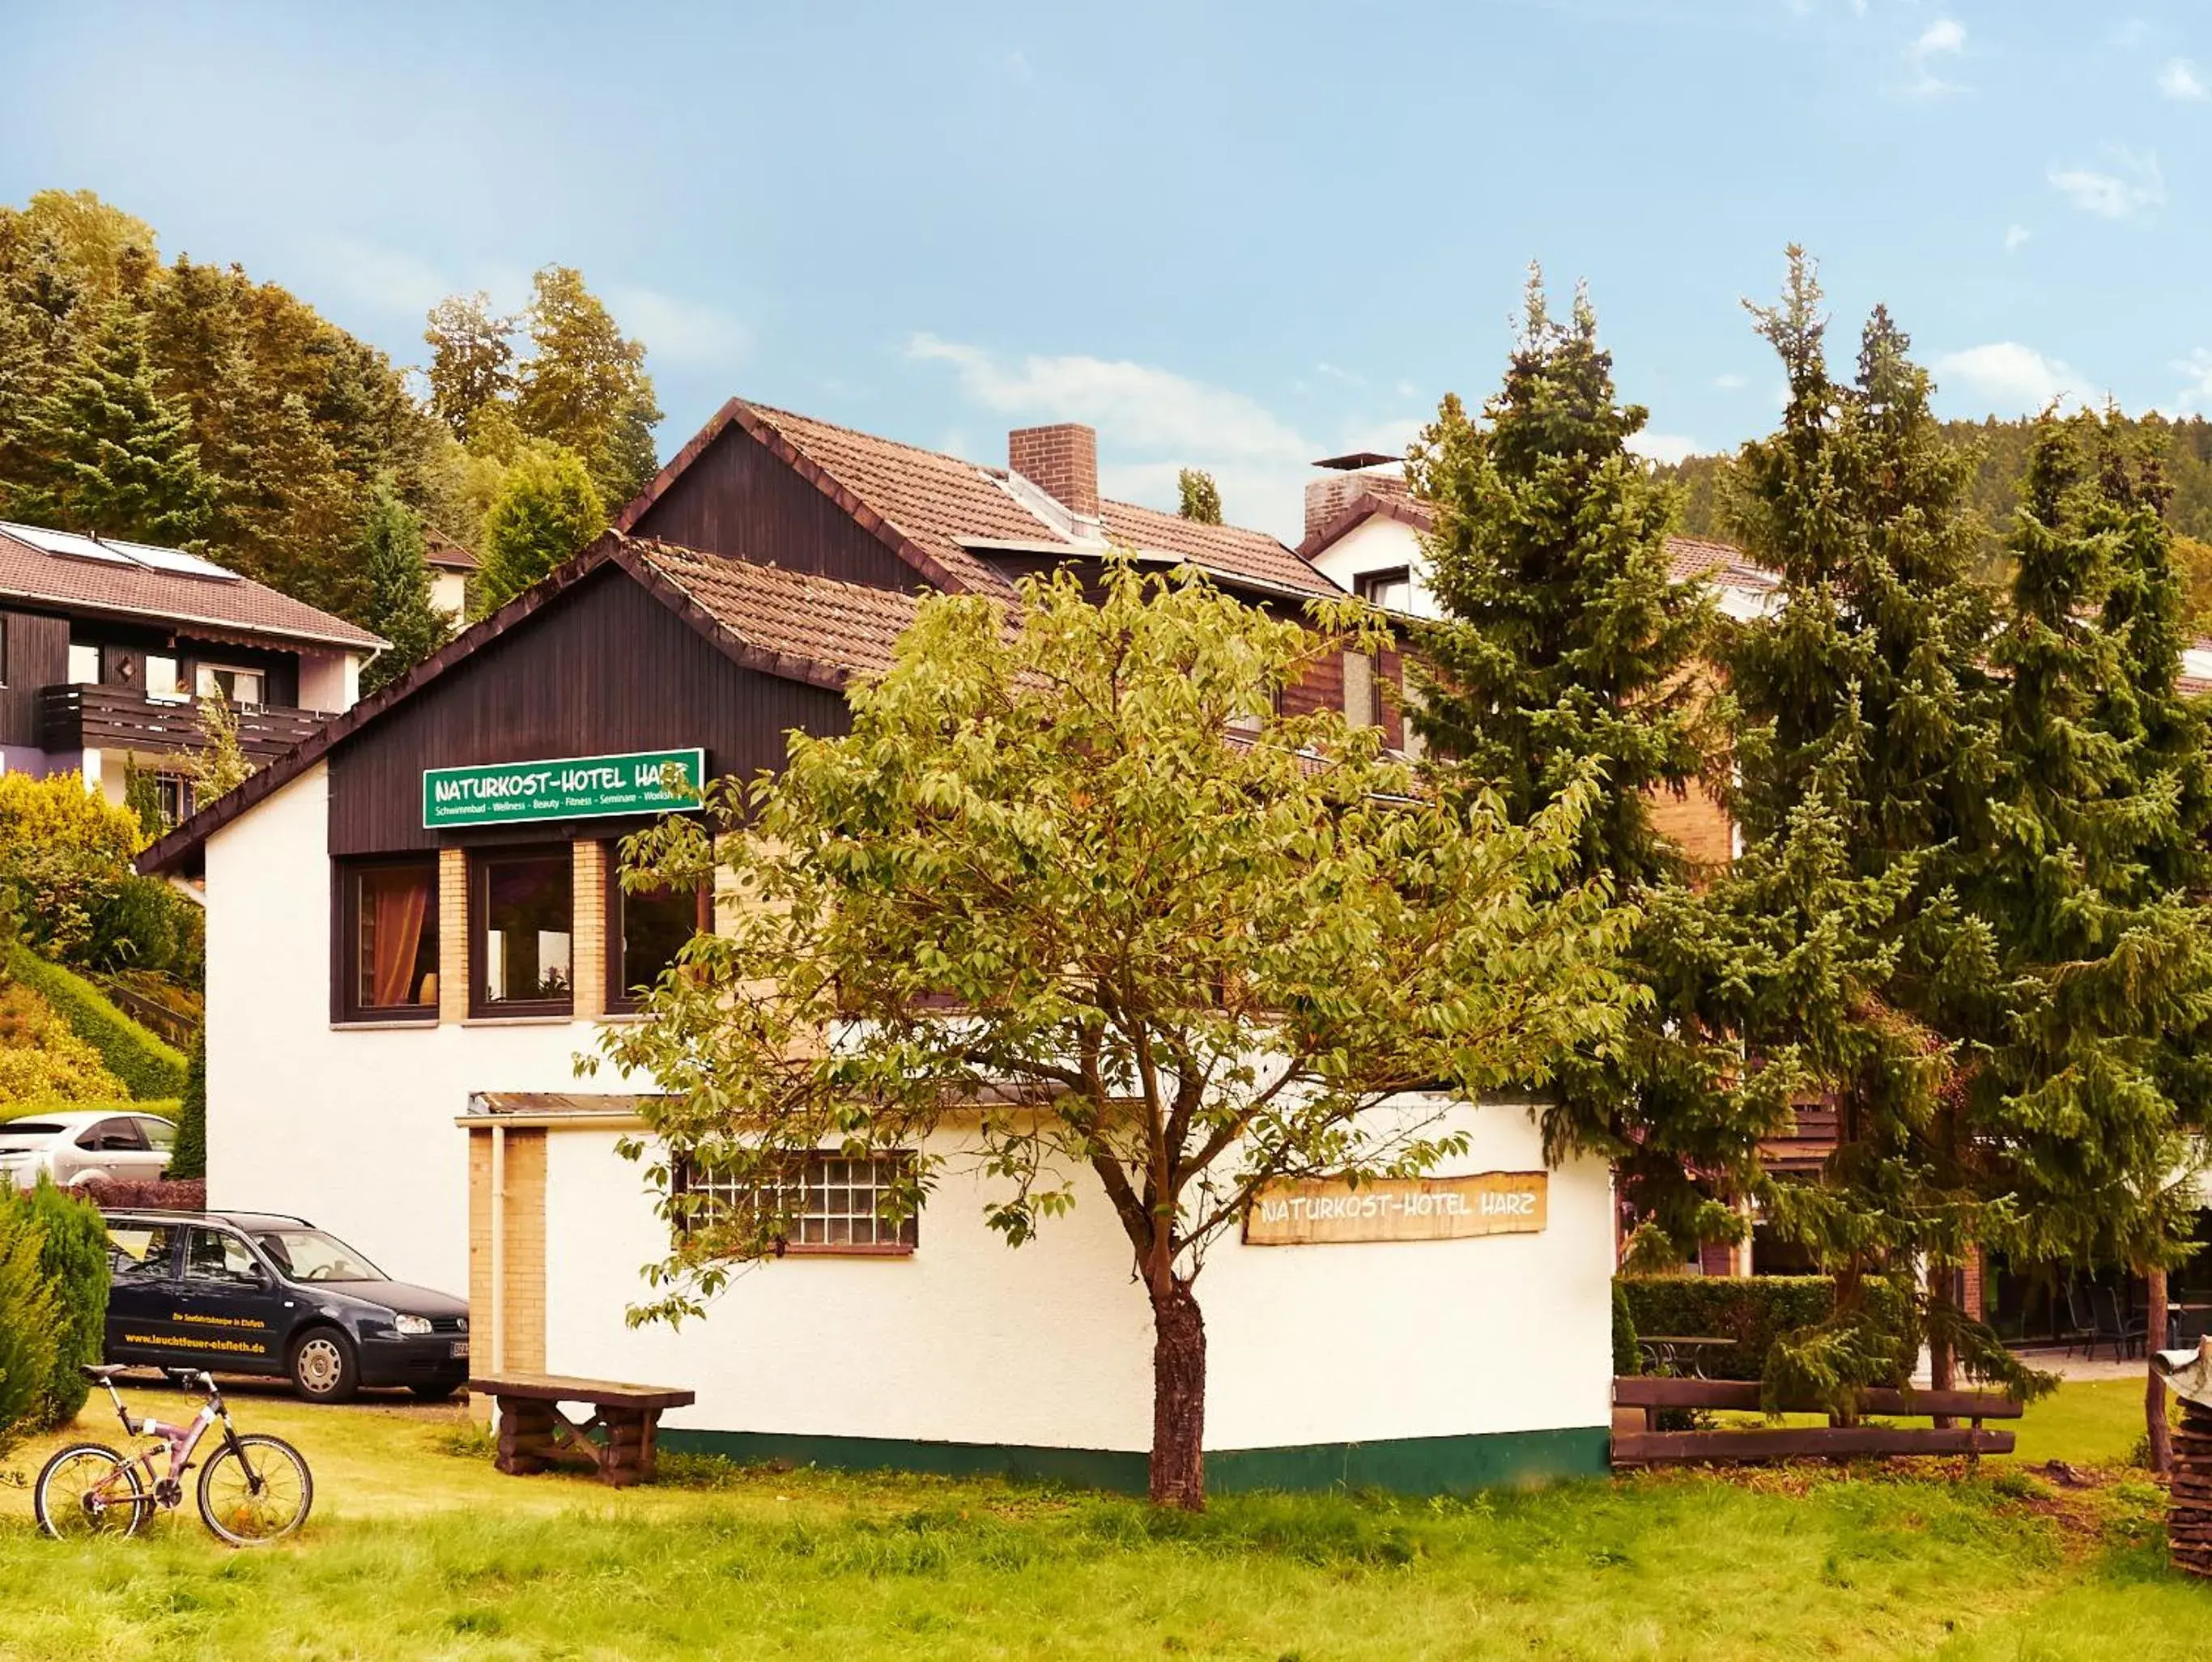 Property Building in Naturkost-Hotel Harz